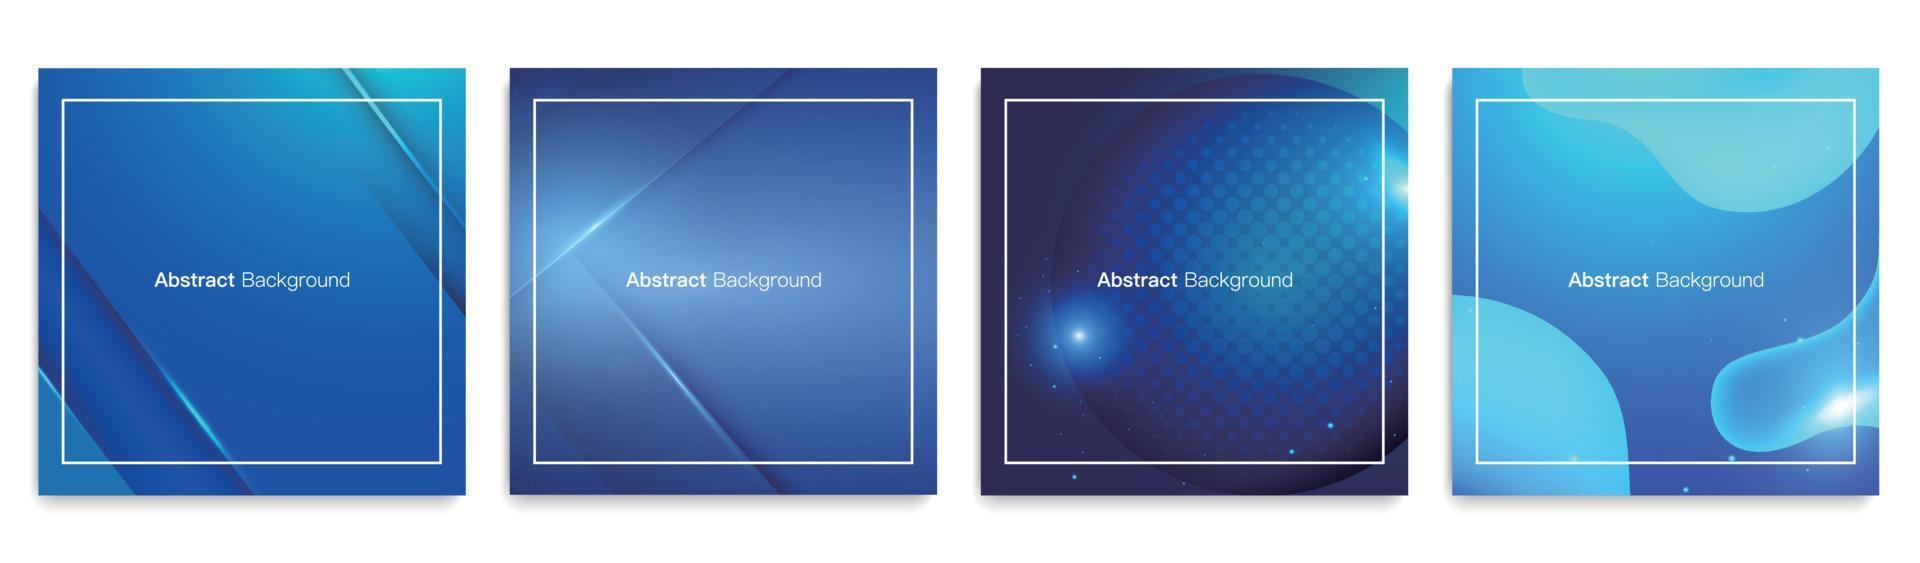 Abstract blue luxury background vector illustration set